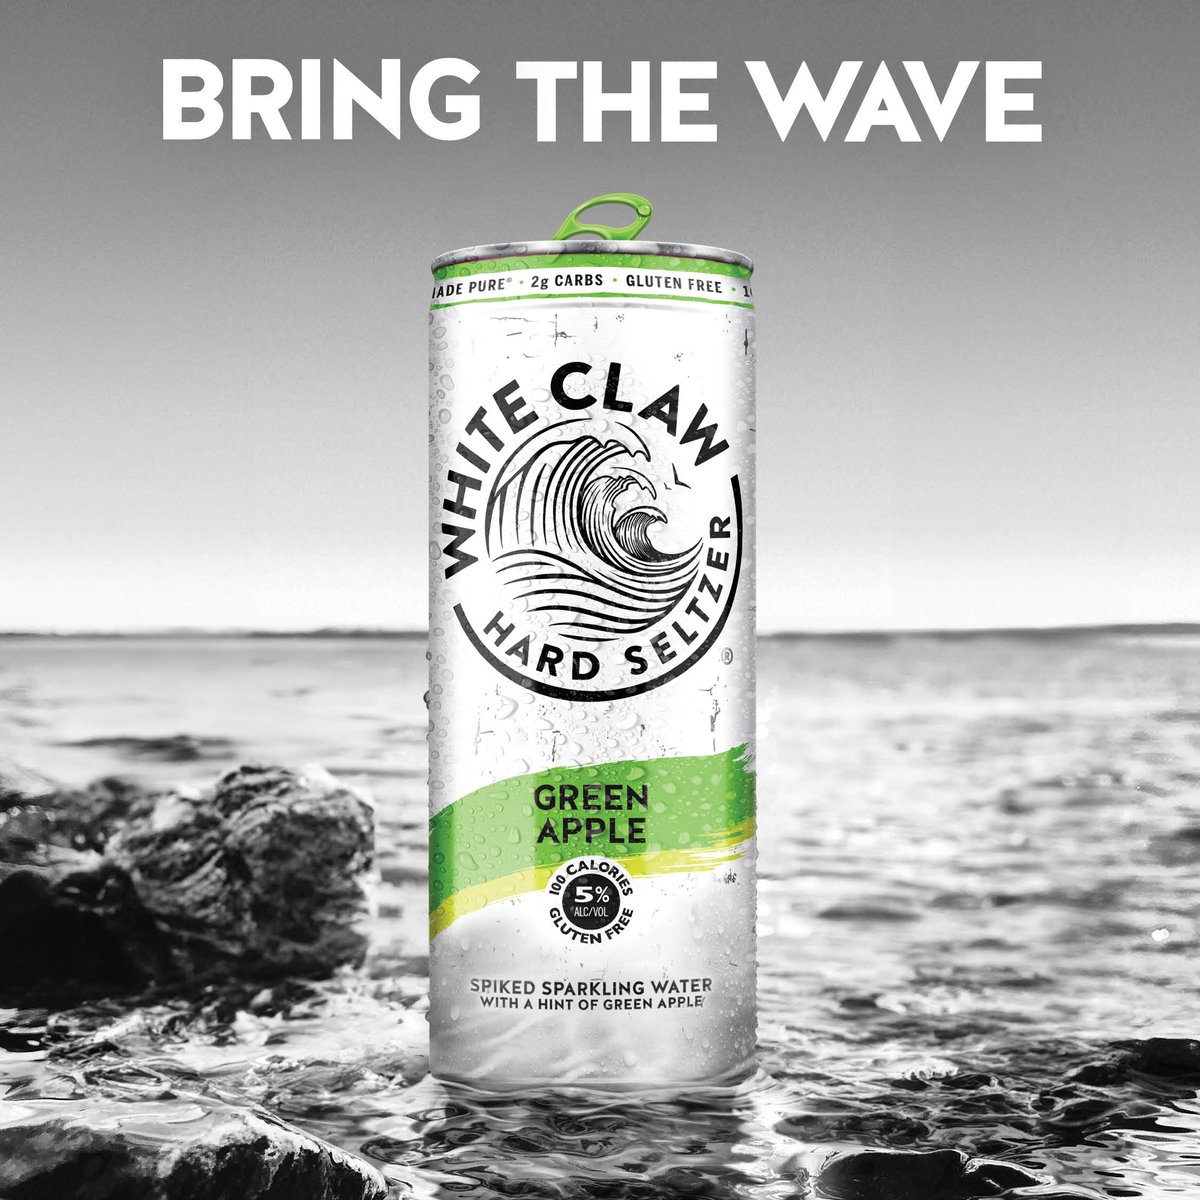 Your fridge looks good in green — and we don’t mean vegetables. Raise your hand if you’re dying to try White Claw Green Apple. ✋